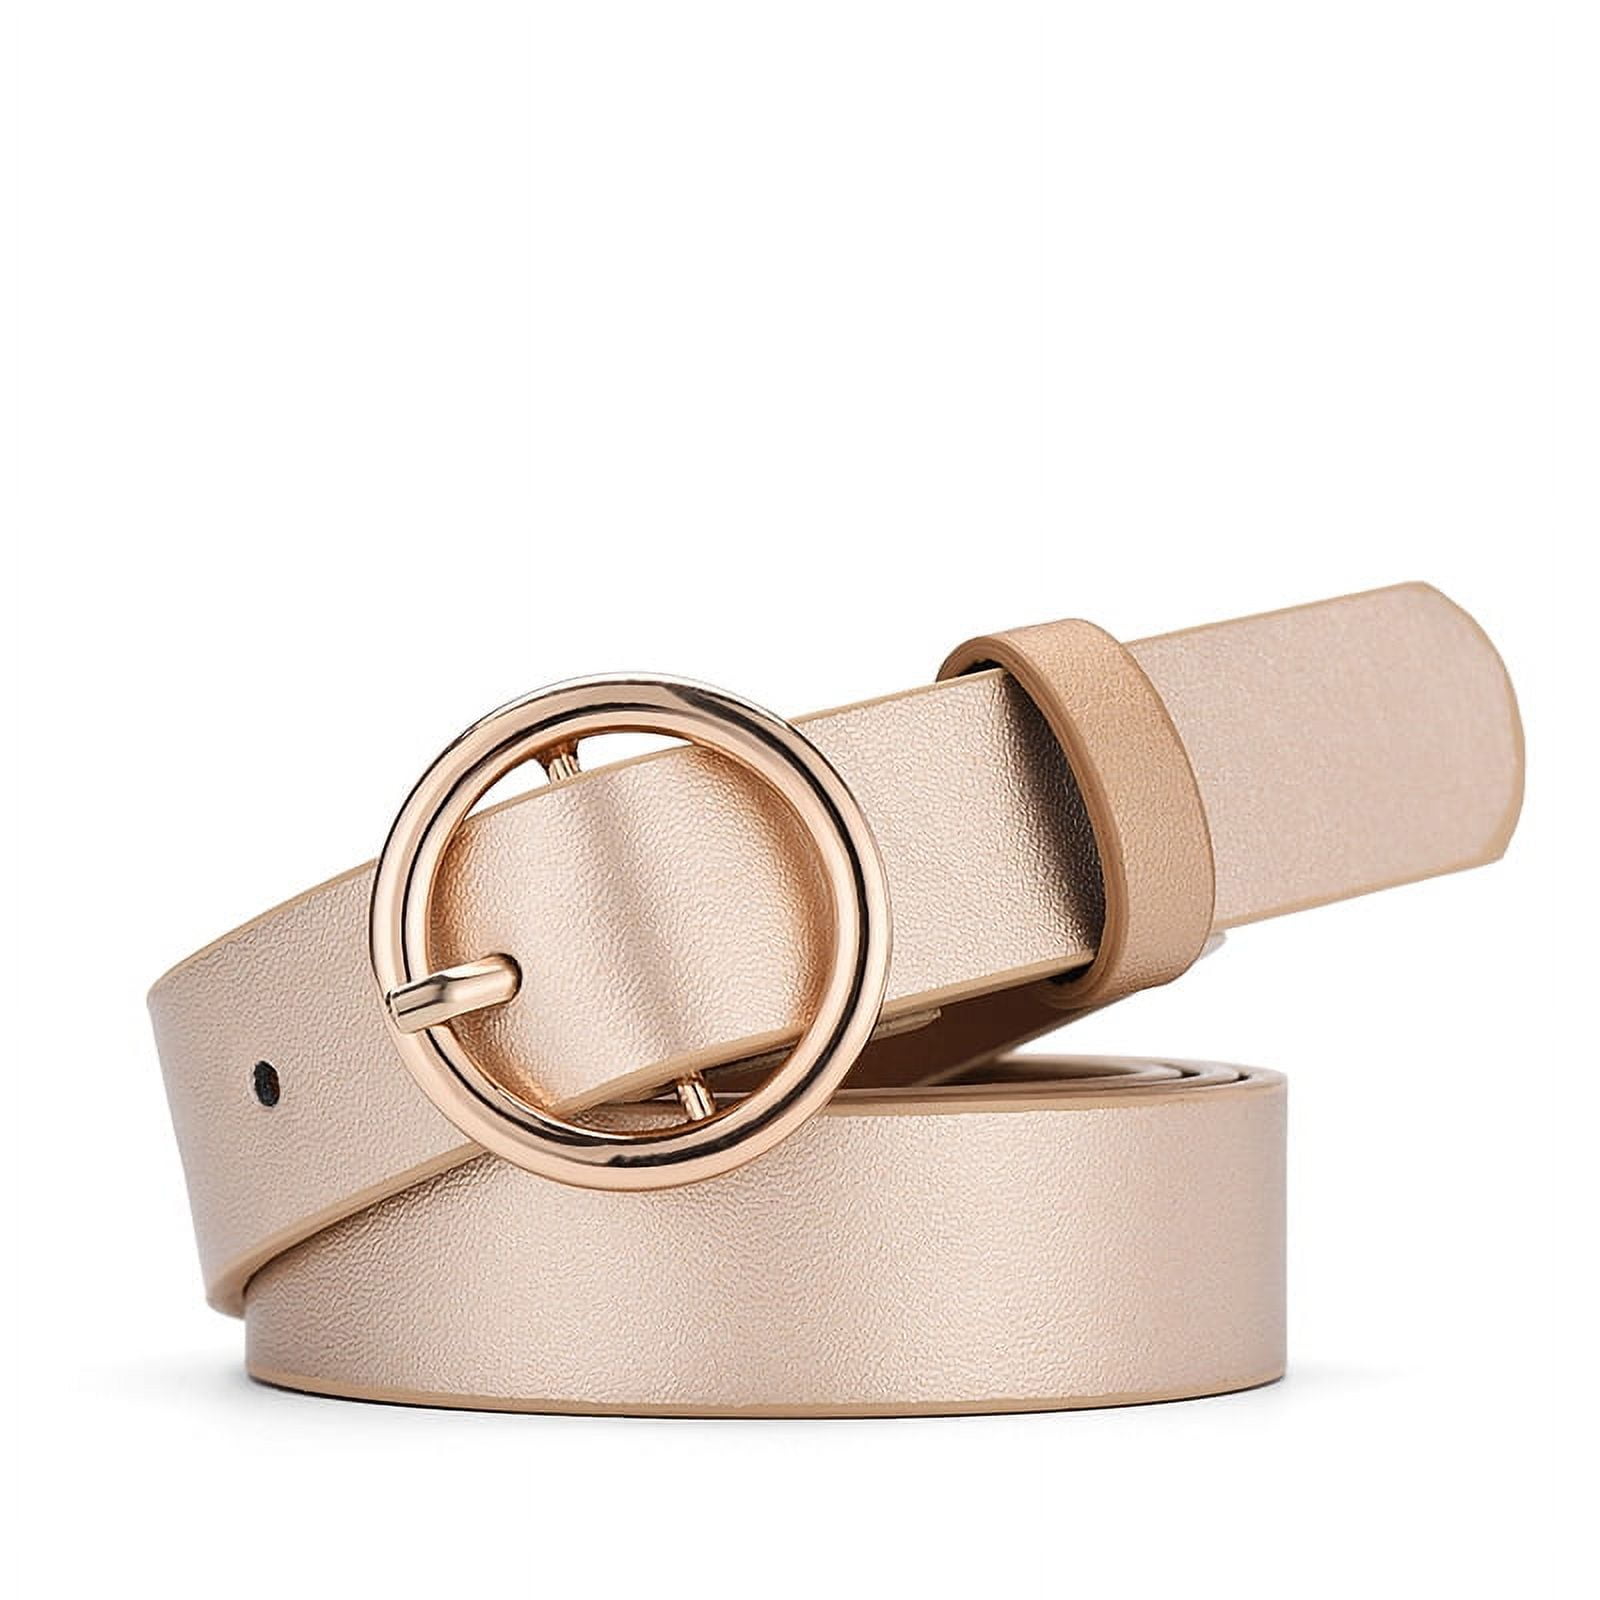 NEW CLASSIC LADIES FASHION BELT  CartRollers ﻿Online Marketplace